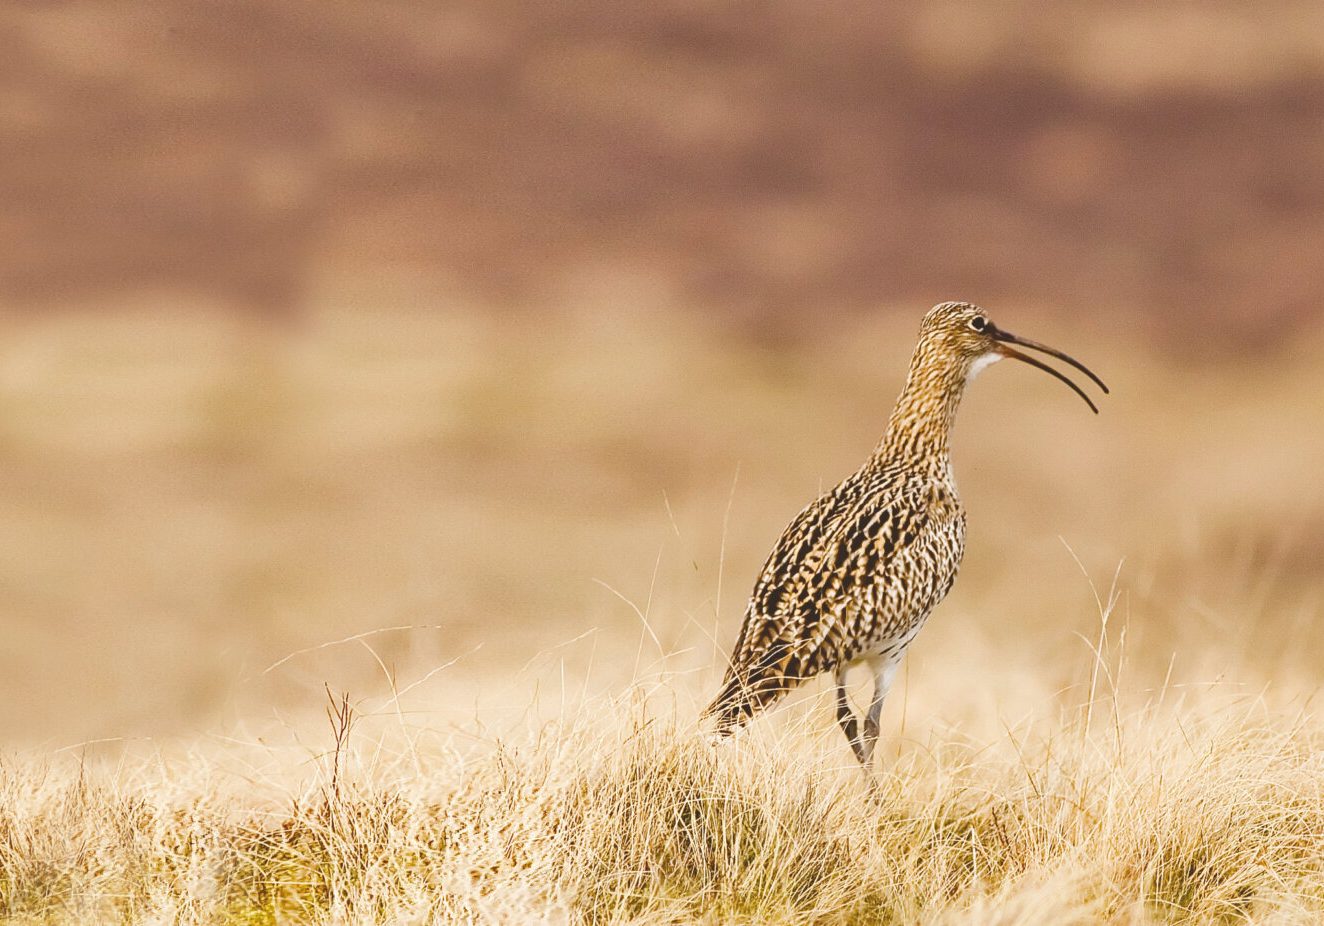 curlew - a speckled brown bird with a long beak - standing on dry grass, facing right